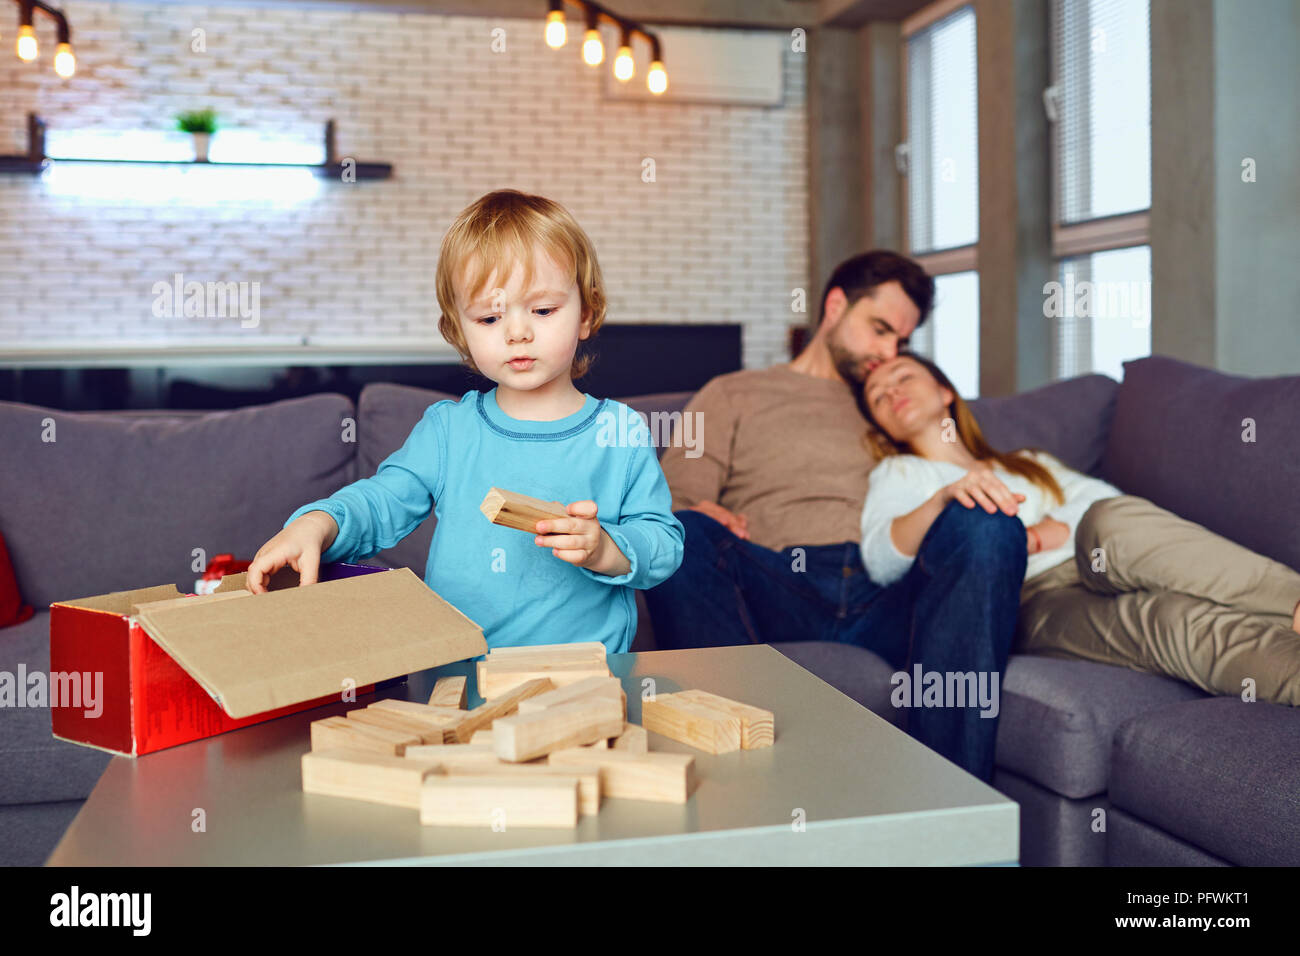 The child is playing board games at home.  Stock Photo